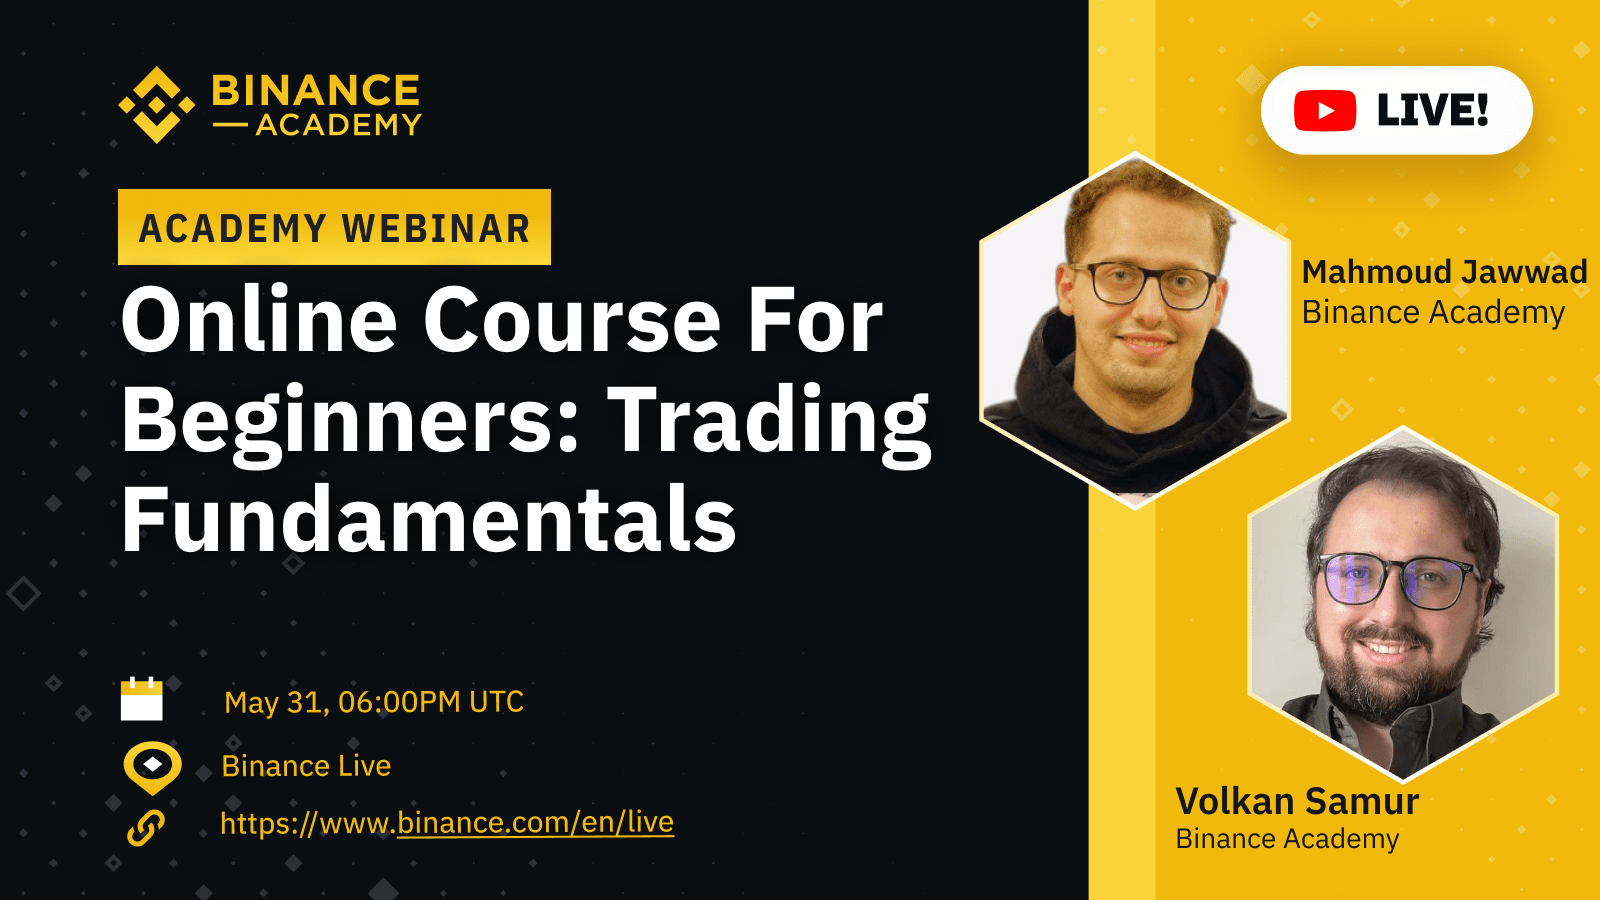 Online Course For Beginners: Trading Fundamentals